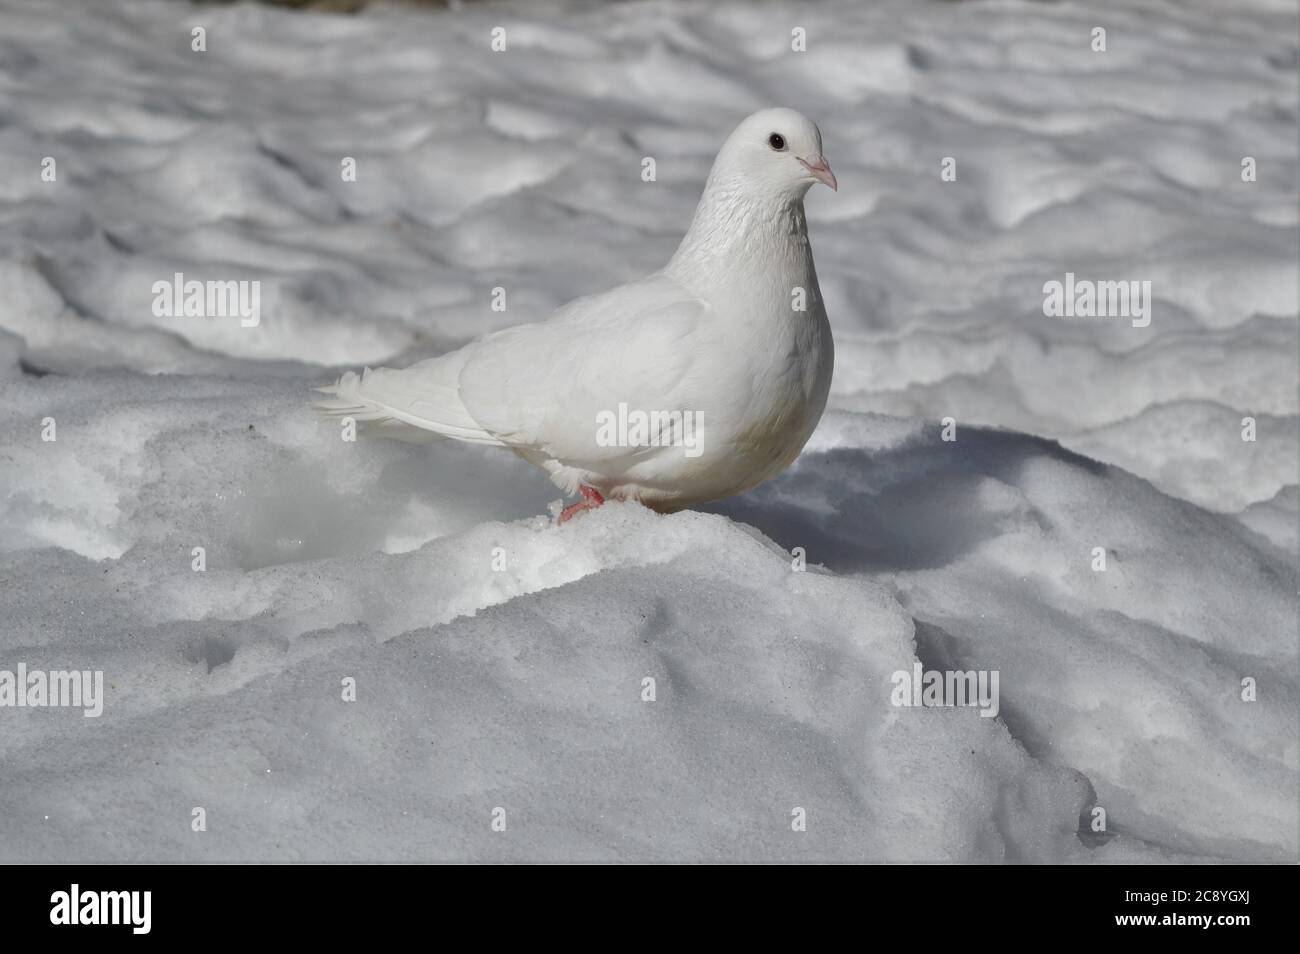 I took this photo of a pigeon in the winter of 2019. The photo is filled with tenderness. Stock Photo